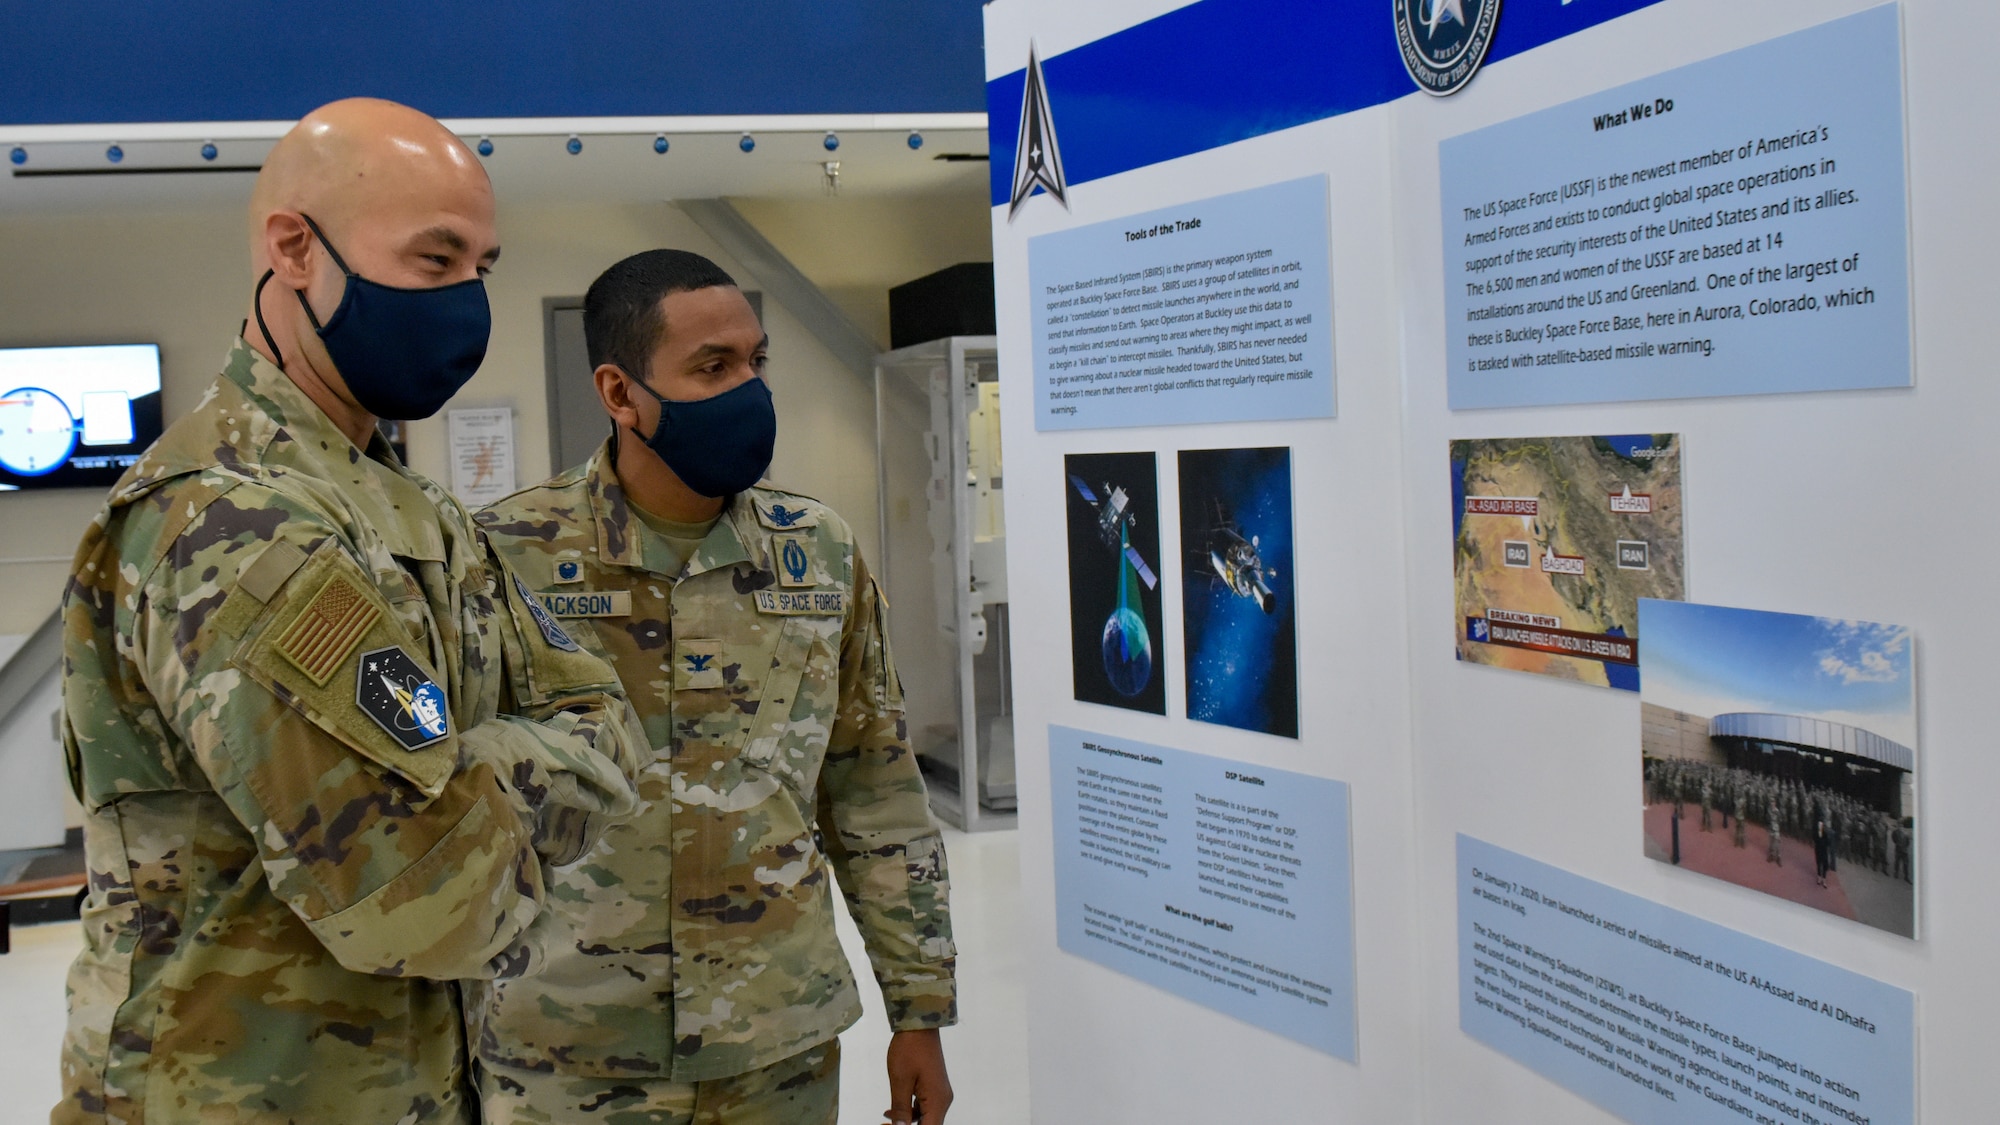 Members from Buckley Garrison teamed up with the museum to create an exhibit celebrating the history of Buckley Garrison and the Space Force as a whole.